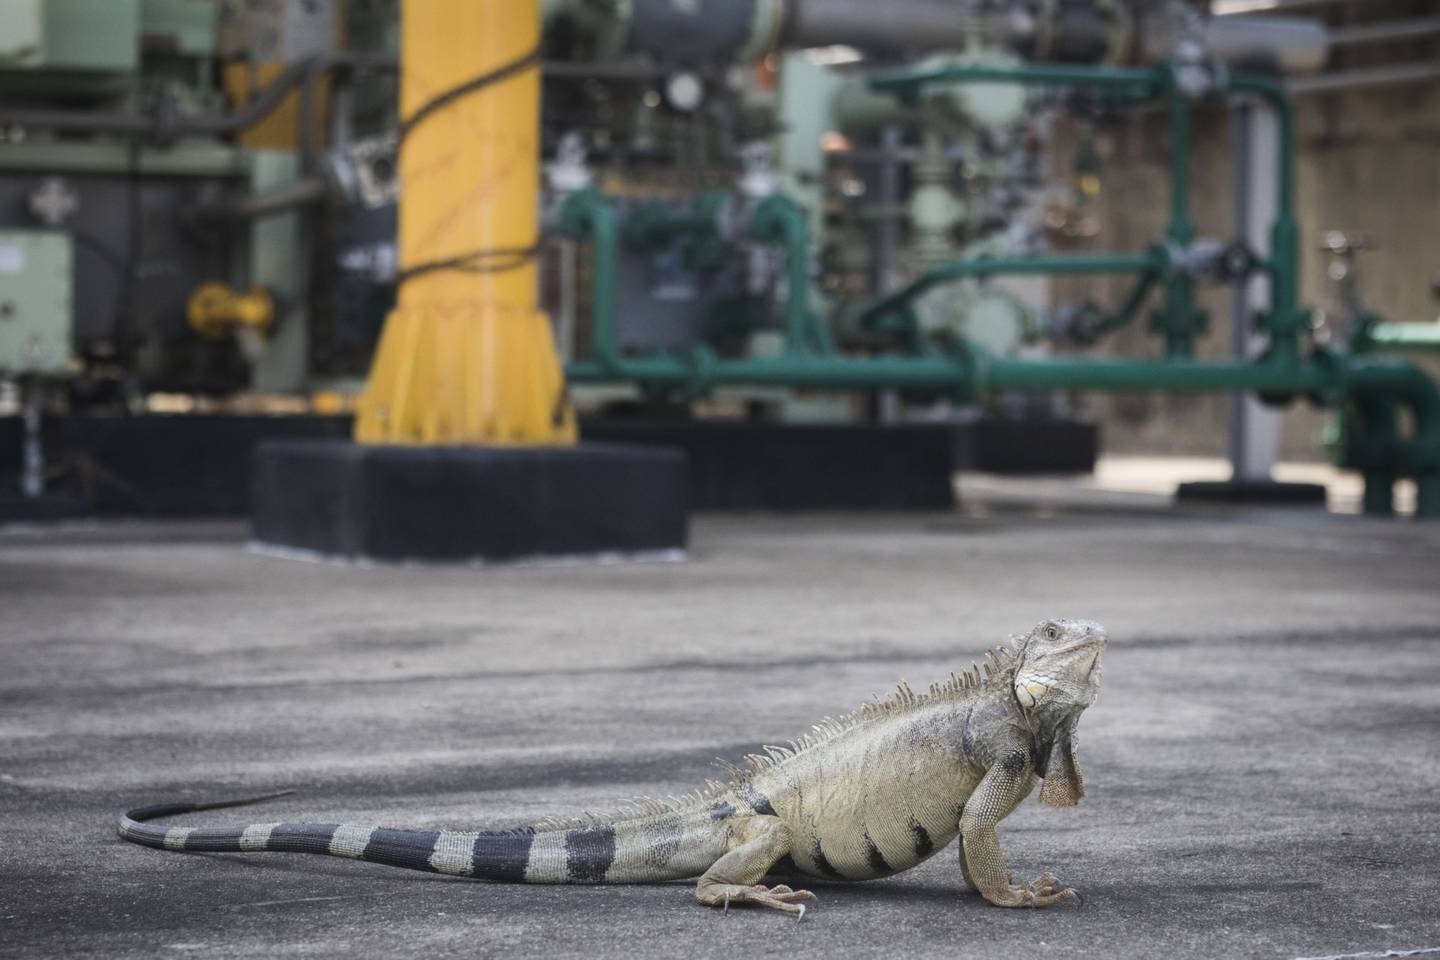 An iguana at an Ecopetrol refinery in Barrancabermeja, Colombia, in February 2022.dfd